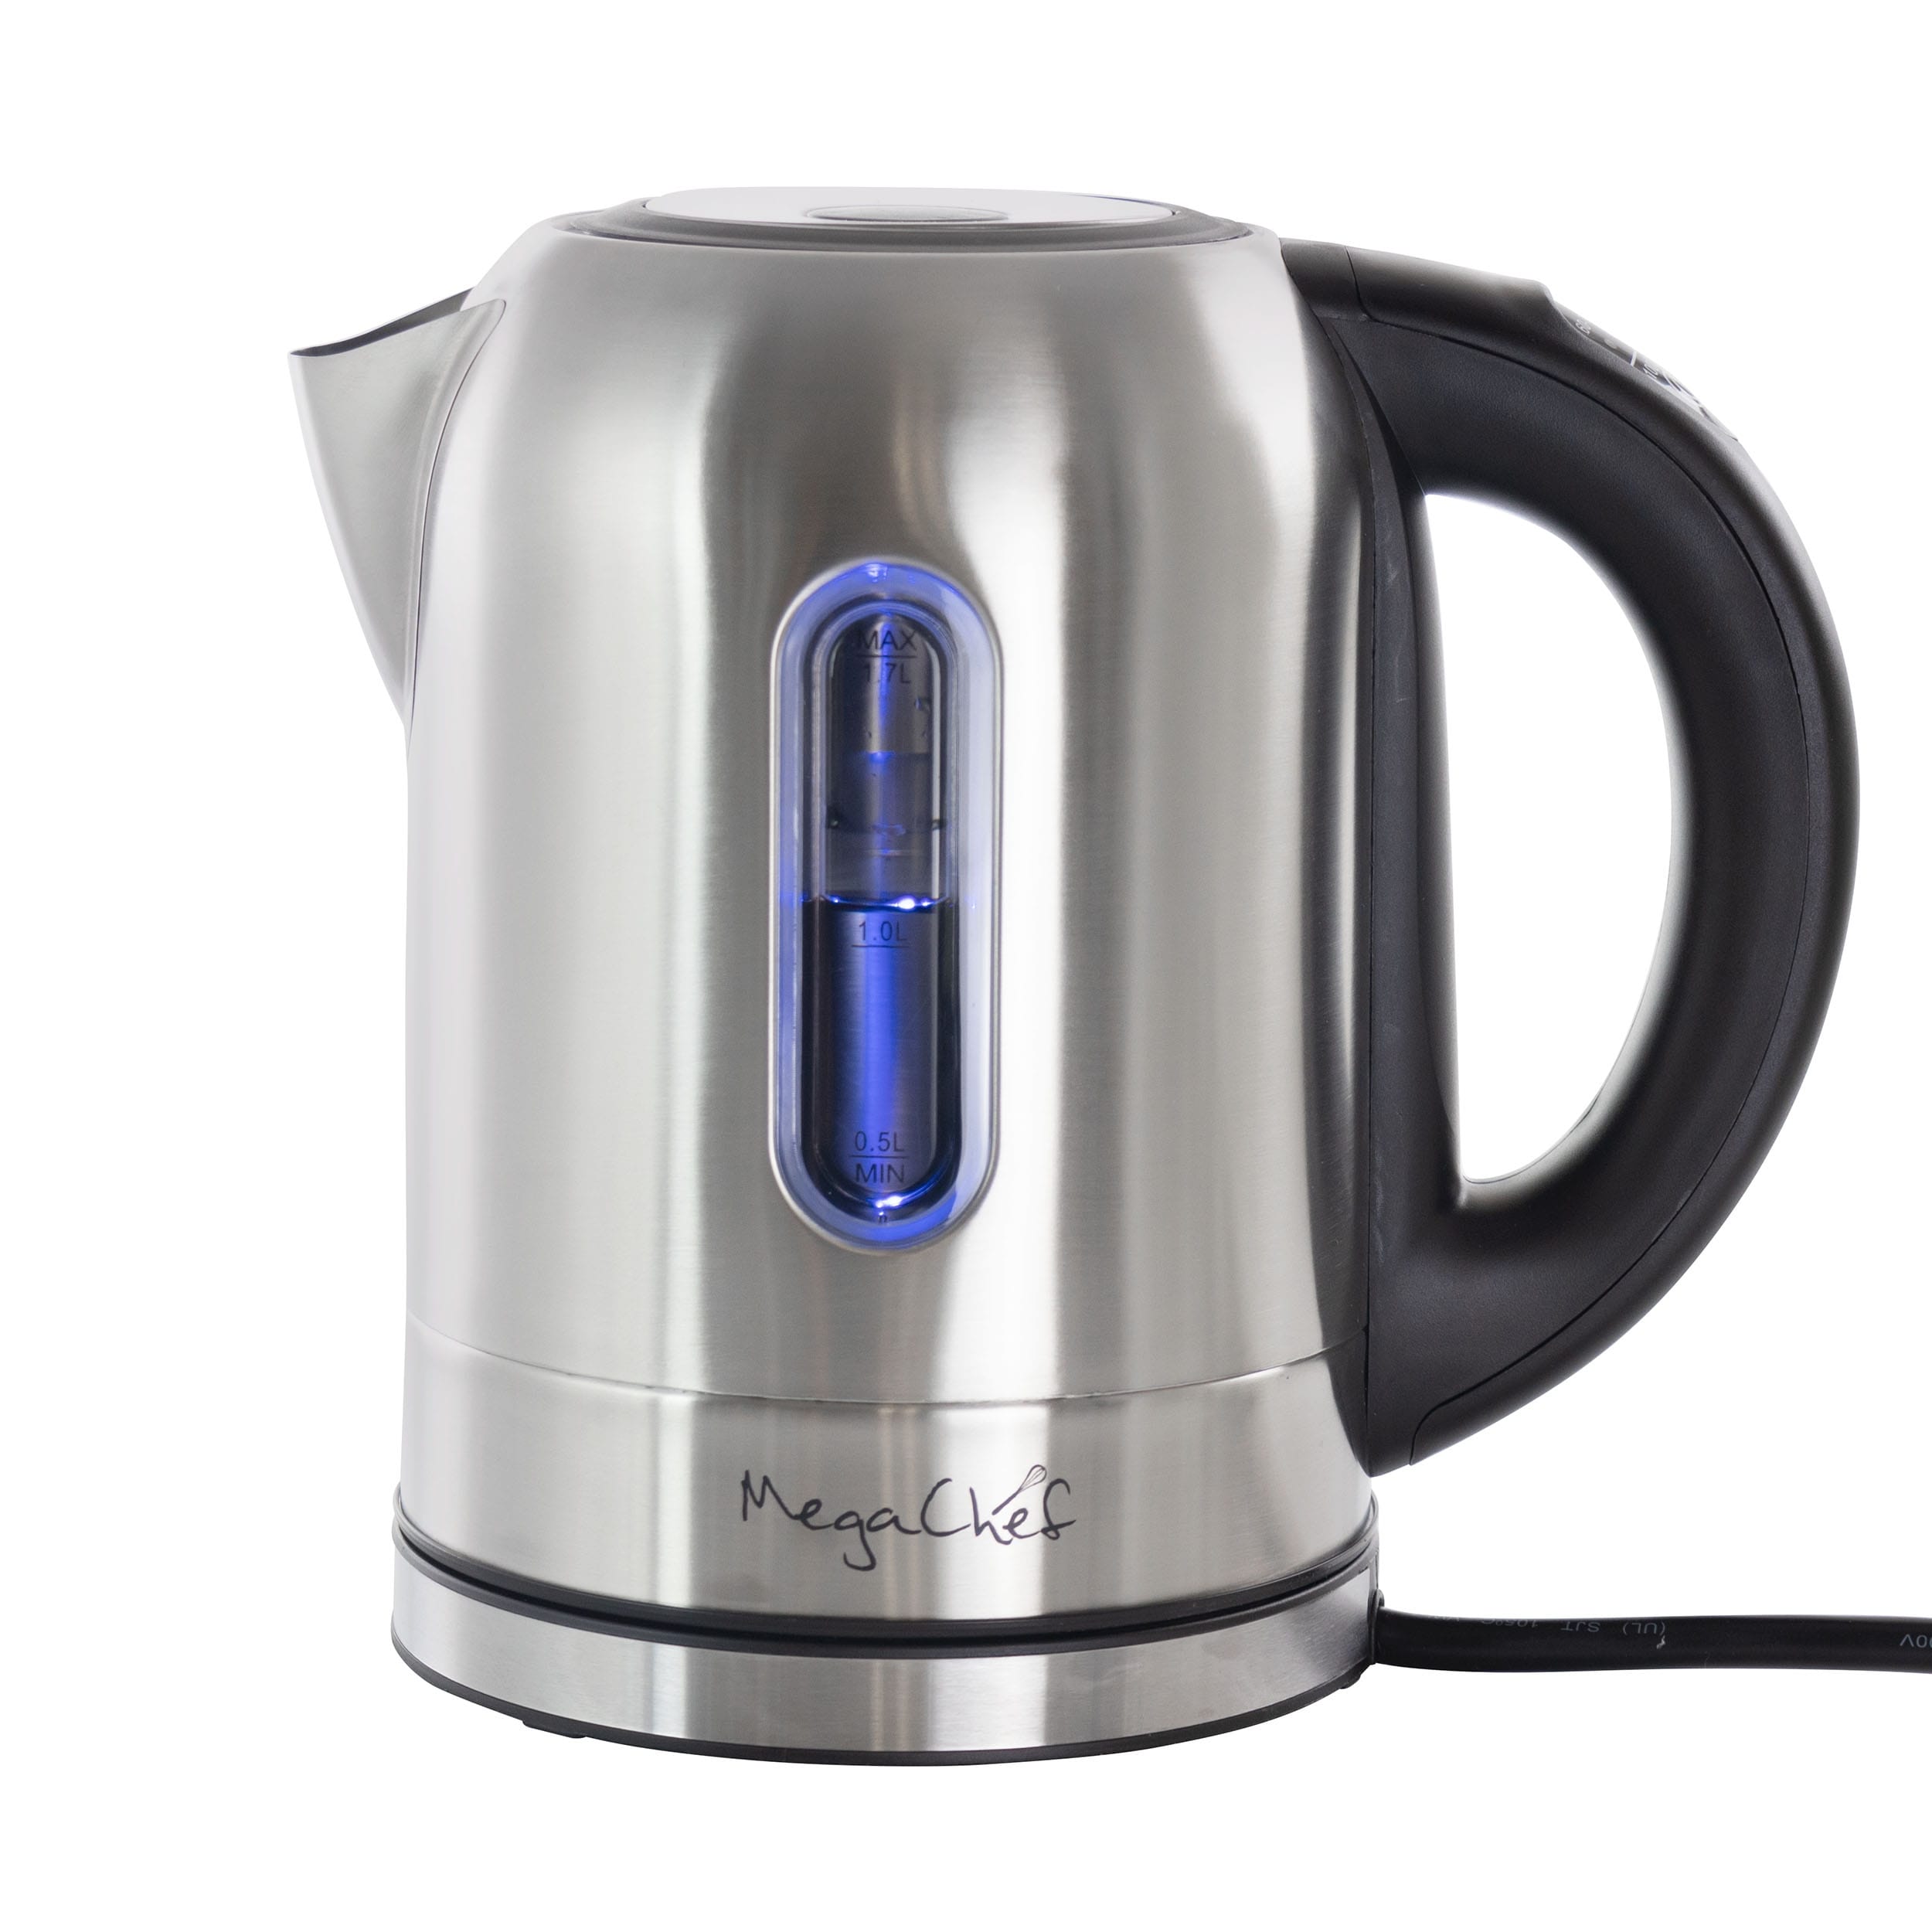 MegaChef 1.7Lt. Stainless Steel Kettle with Electr...